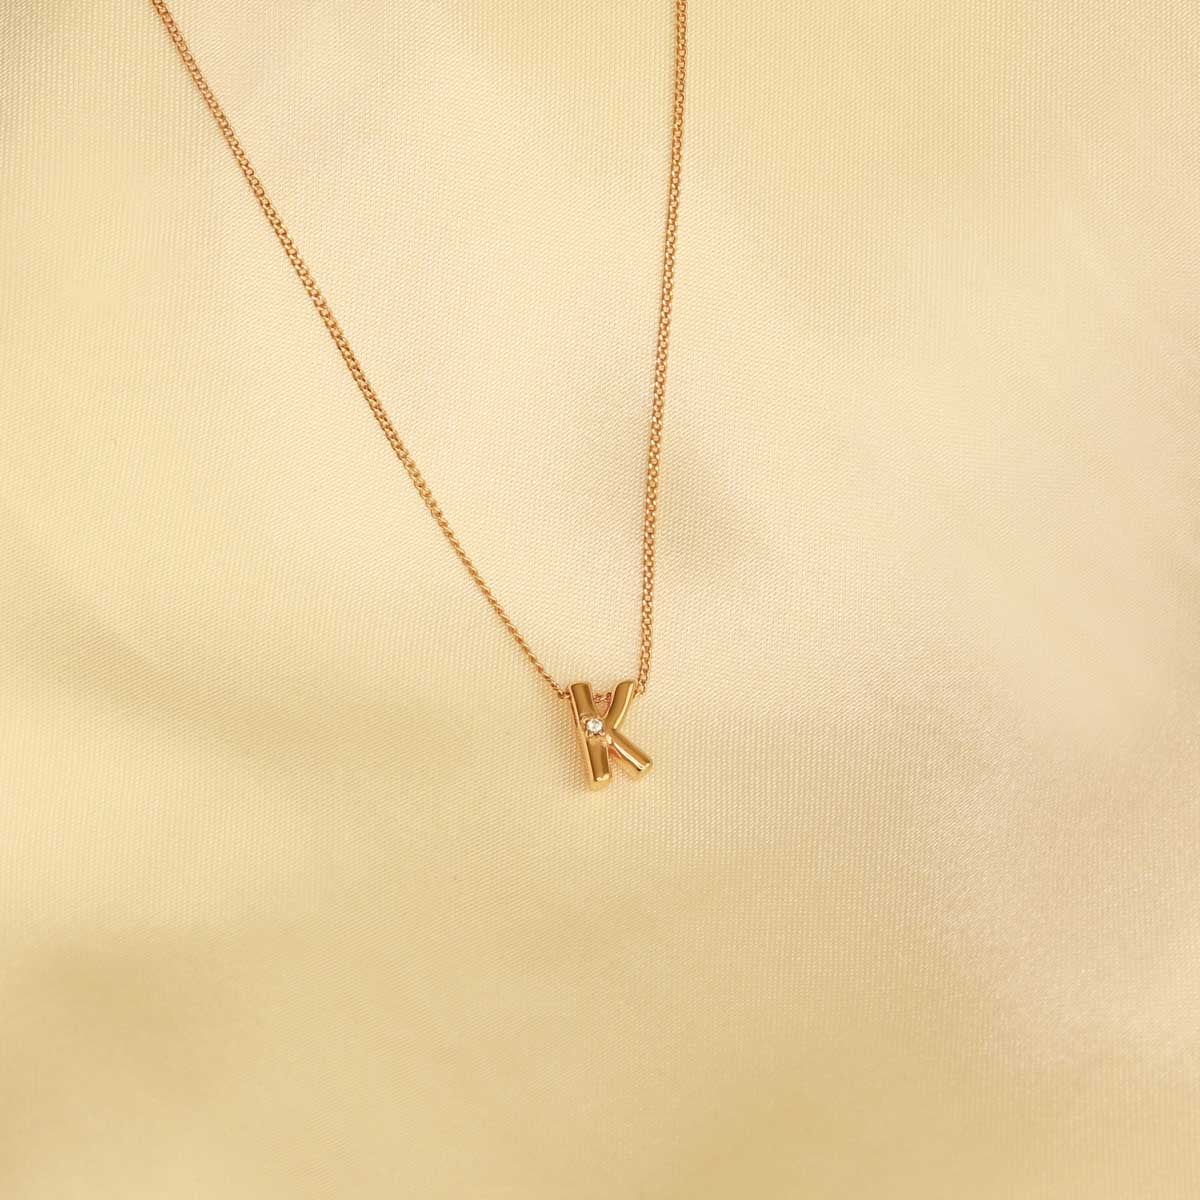 Flat lay shot of K Initial Pendant Necklace in Gold